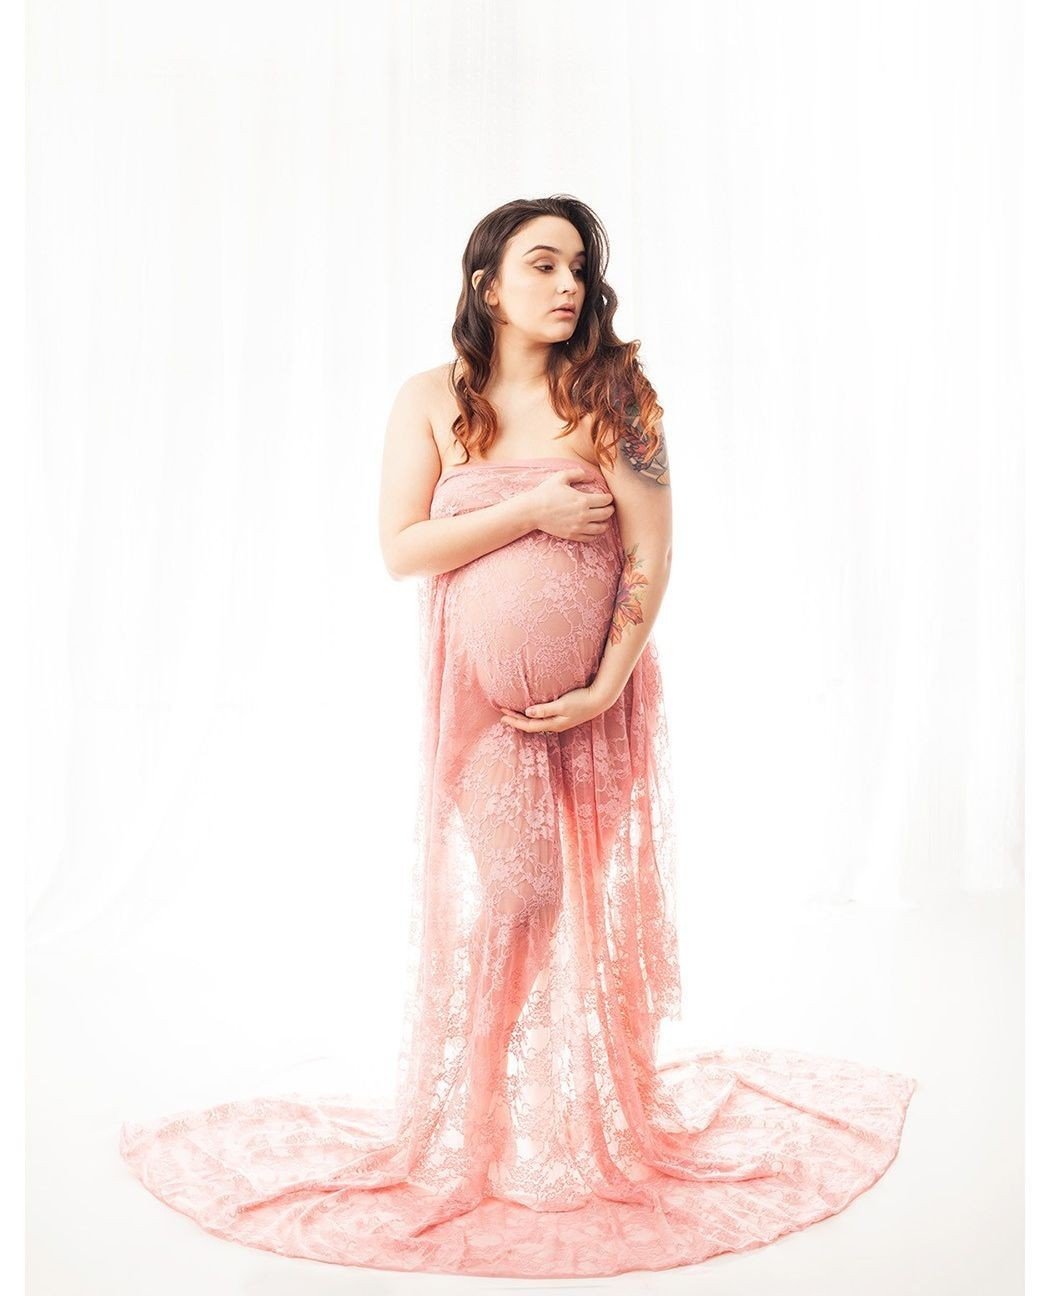 It's timeeeee! 💗⁠
Optimal Weeks for Maternity Photos⁠
⁠
The optimal time for a maternity photography session is generally between 30 to 33 weeks of pregnancy. During this period, the belly is pronounced and shapely, providing the perfect silhouette 